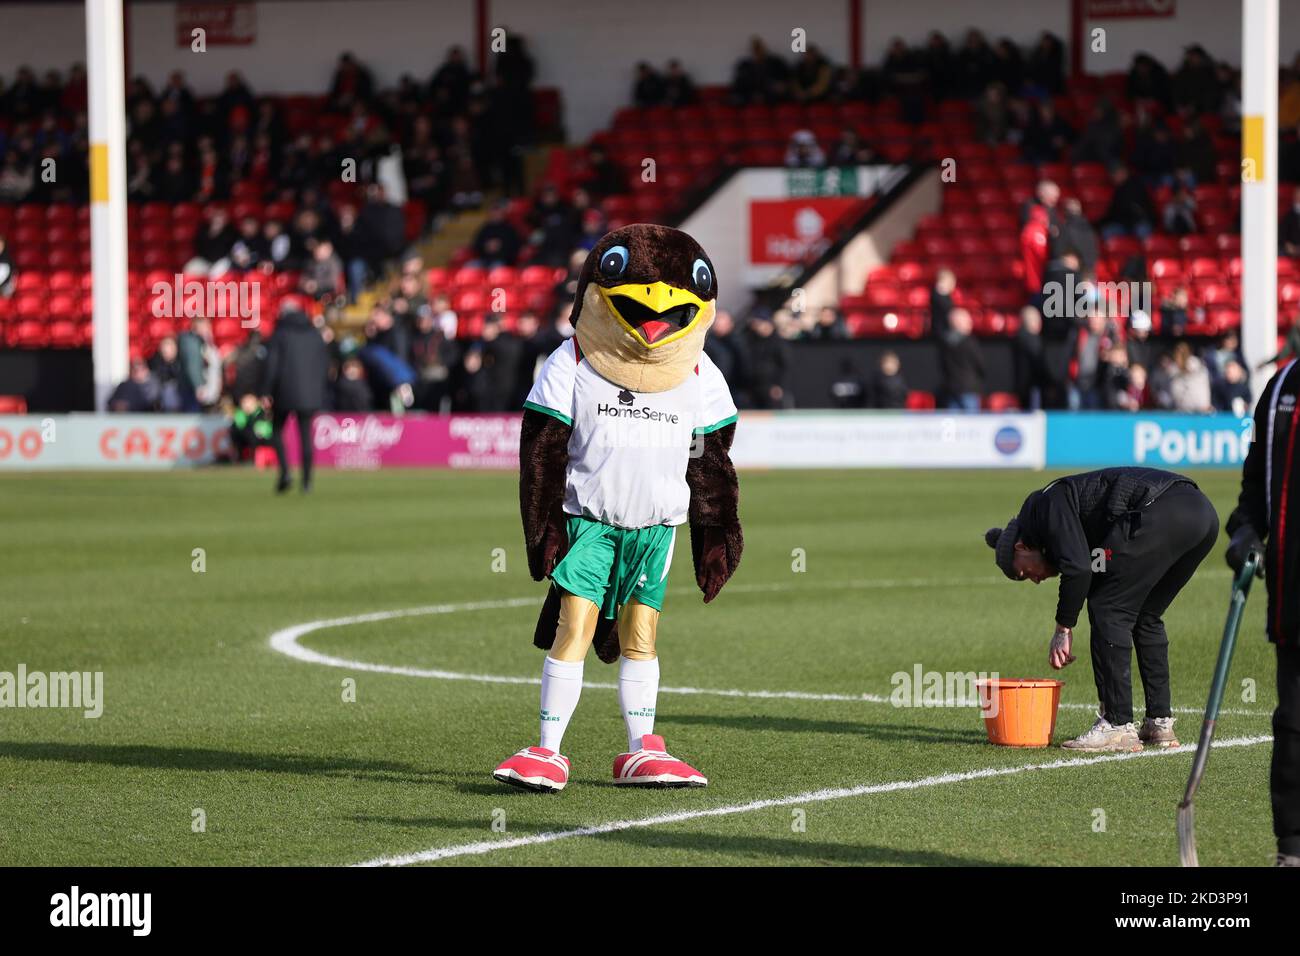 Swifty the Walsall mascot is seen ahead of kickoff during the Sky Bet League 2 match between Walsall and Hartlepool United at the Banks' Stadium, Walsall on Saturday 26th February 2022. (Photo by James Holyoak/MI News/NurPhoto) Stock Photo